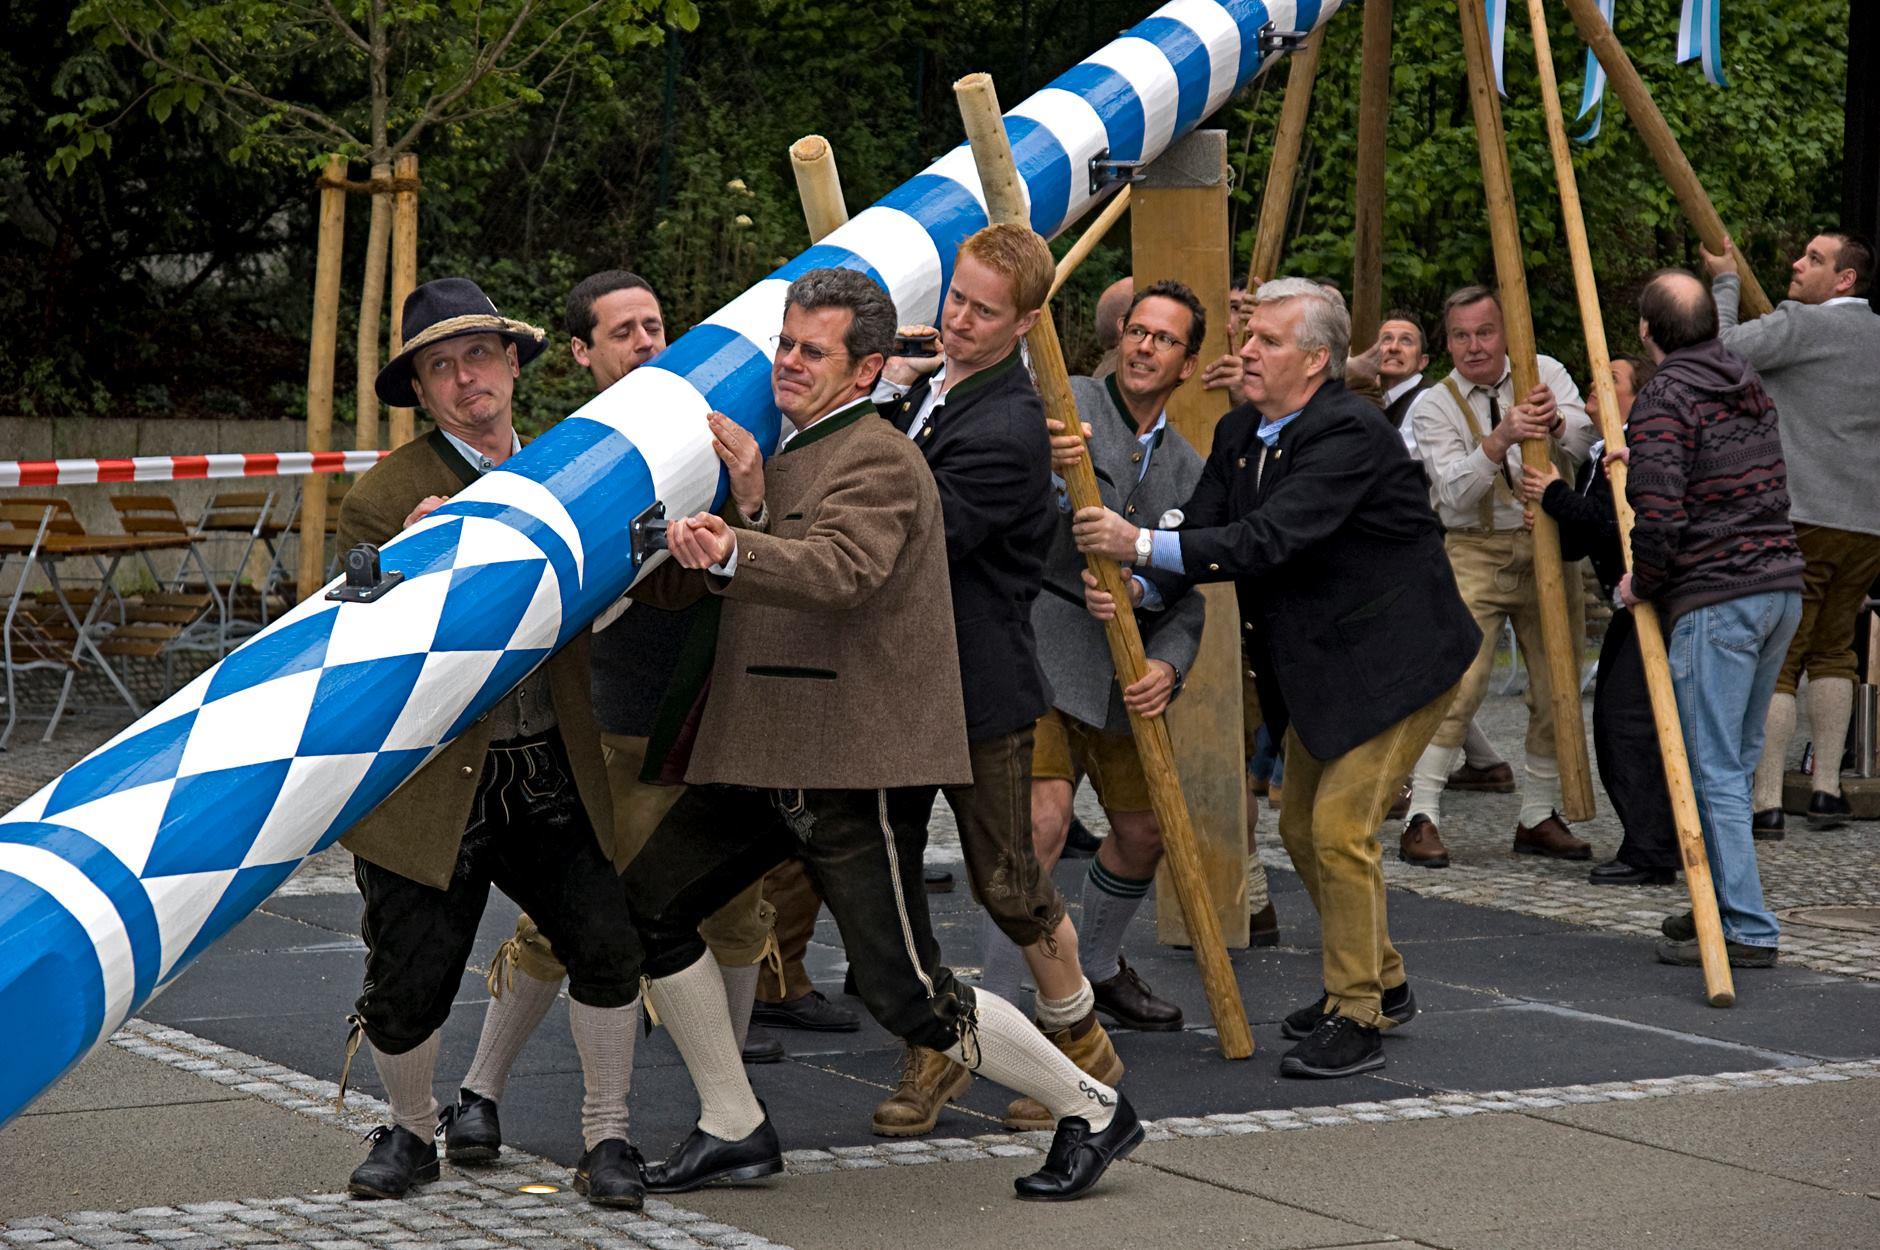 A Maibaum, or maypole, is part of the traditional German festival marking the start of spring. (Hofbräuhaus Chicago)